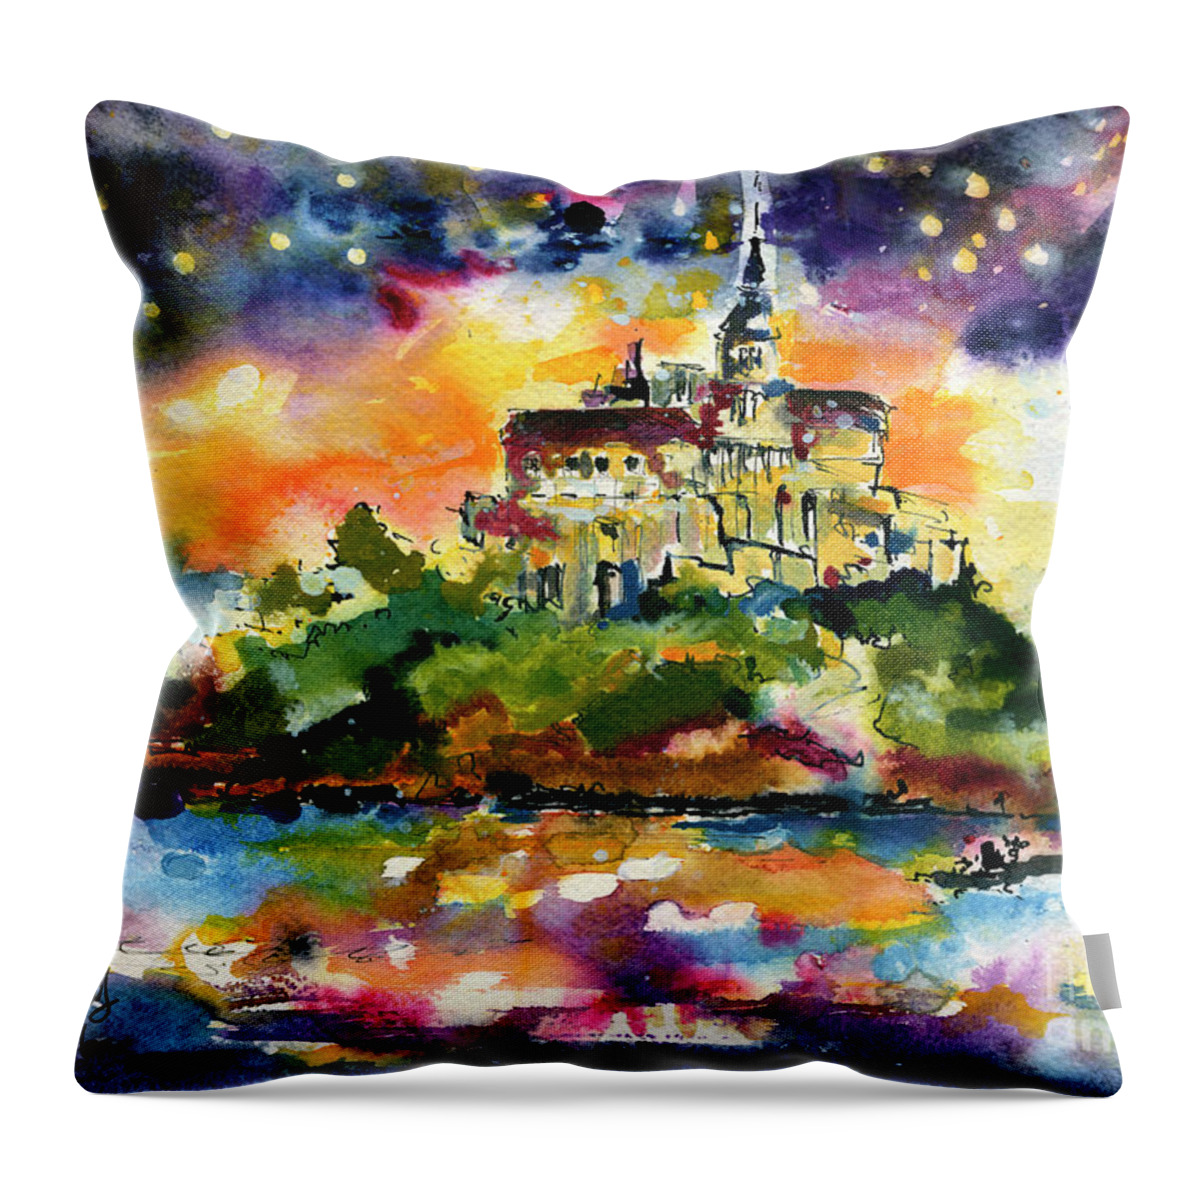 Mont Saint Michel Throw Pillow featuring the painting Mont Saint Michel France Watercolors by Ginette Callaway